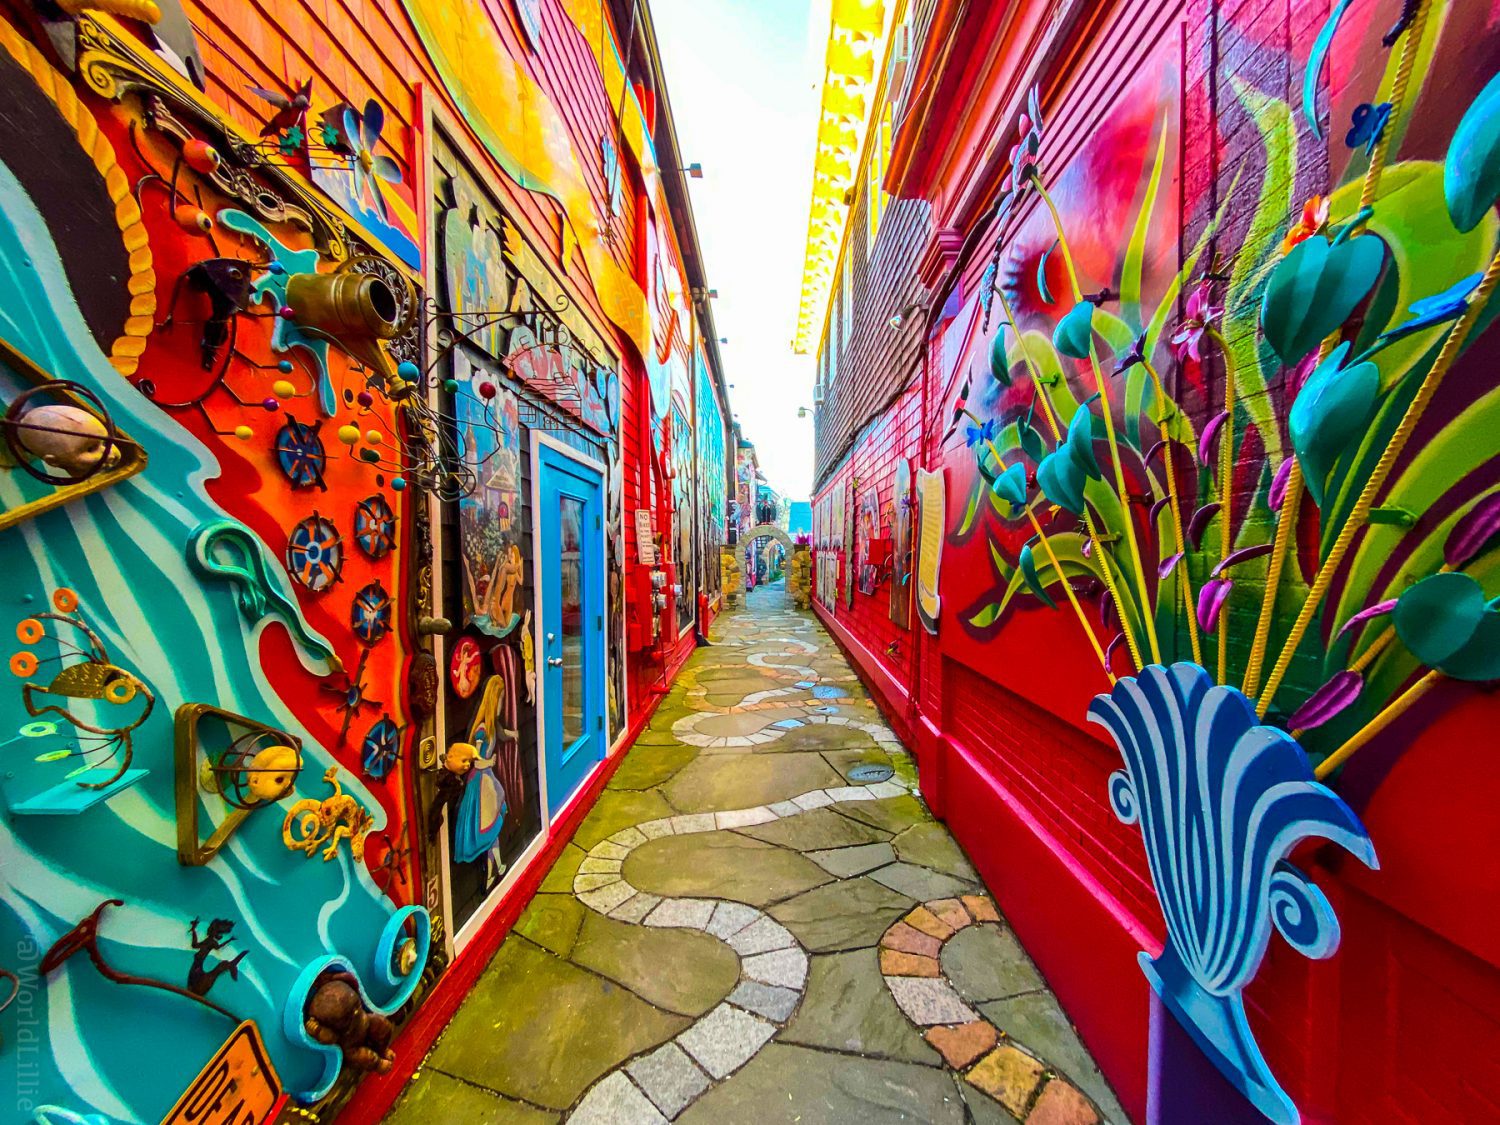 The Provincetown art alley.